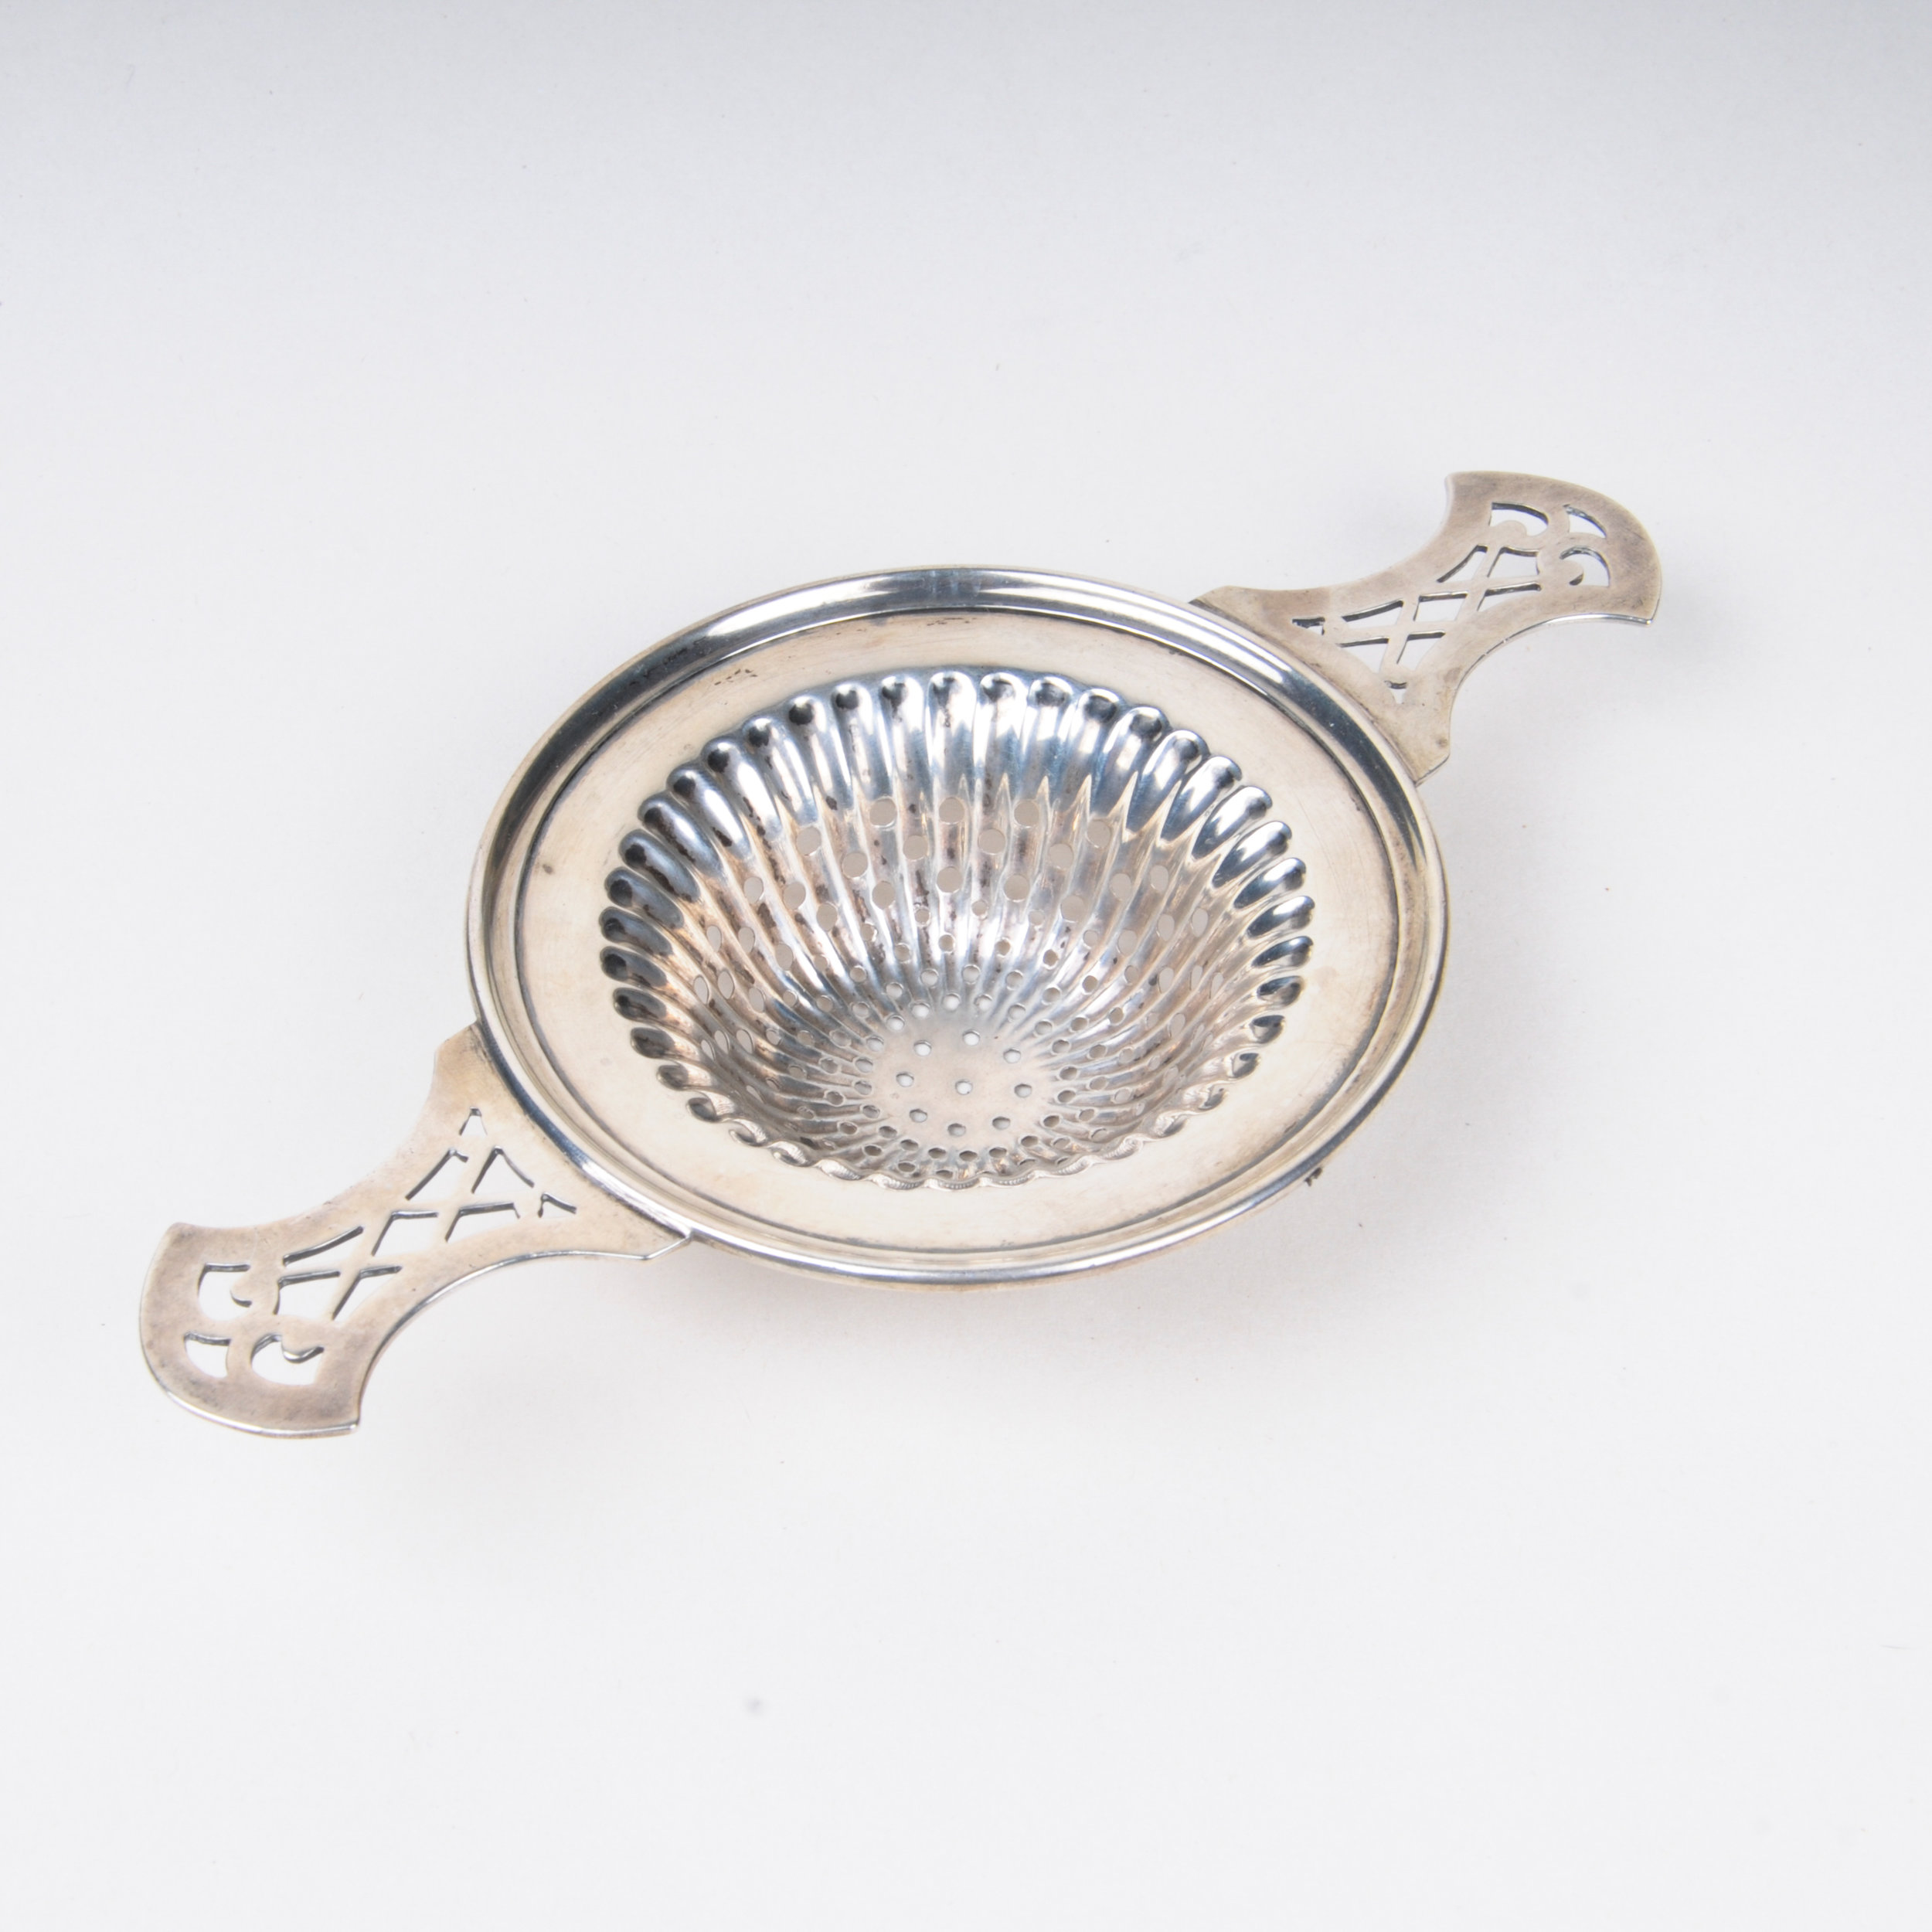 Tea strainers and infusers in Antique Sterling Silver Bryan